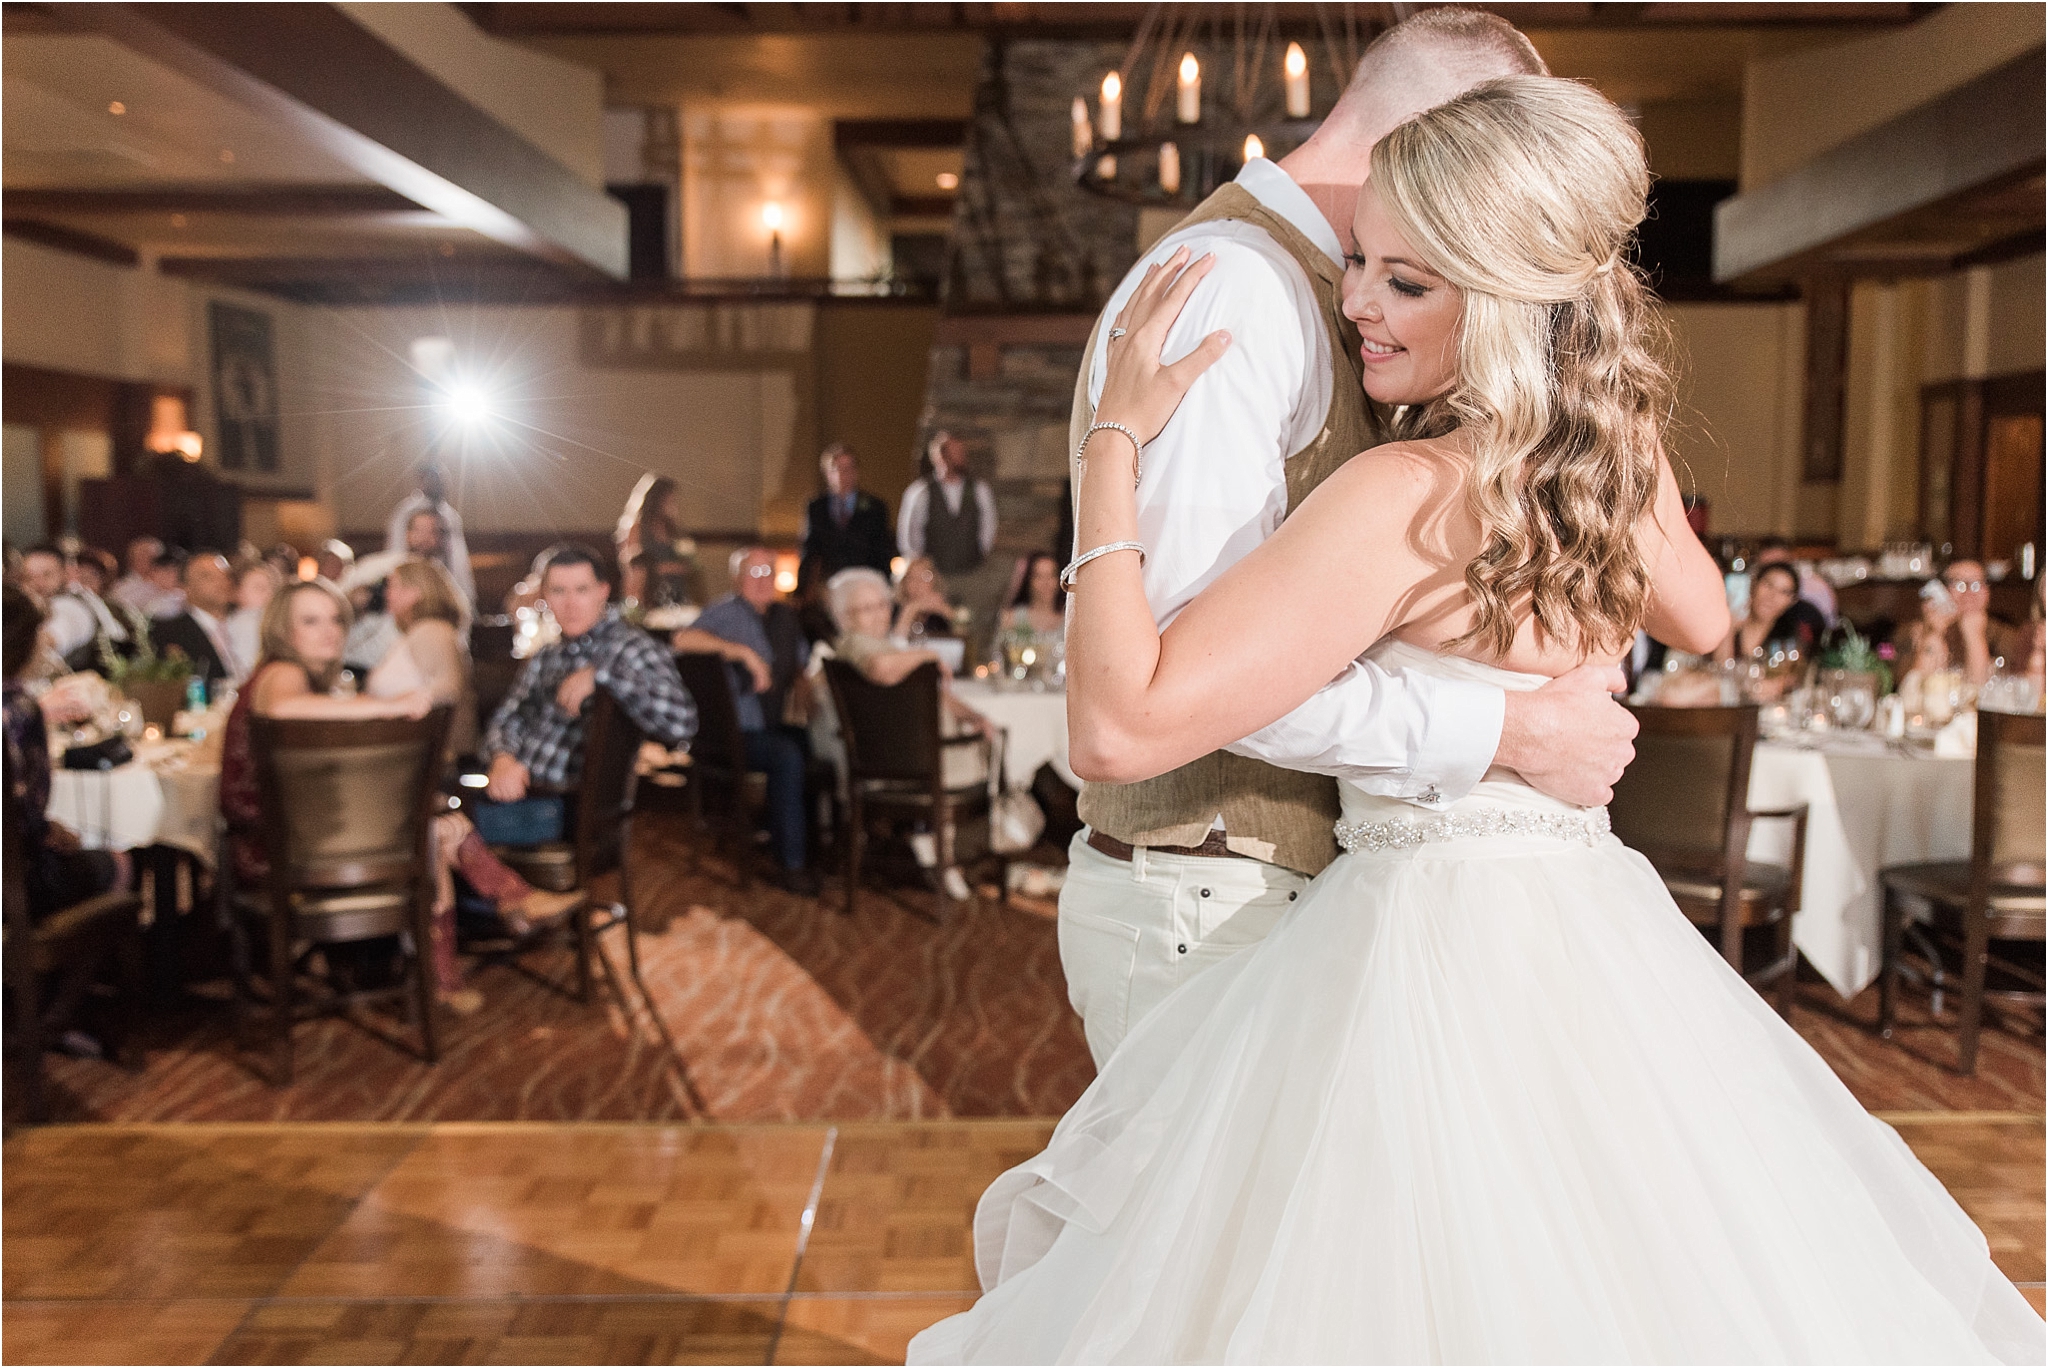 The Lodge at Ventana Canyon wedding photo of bride and groom's first dance